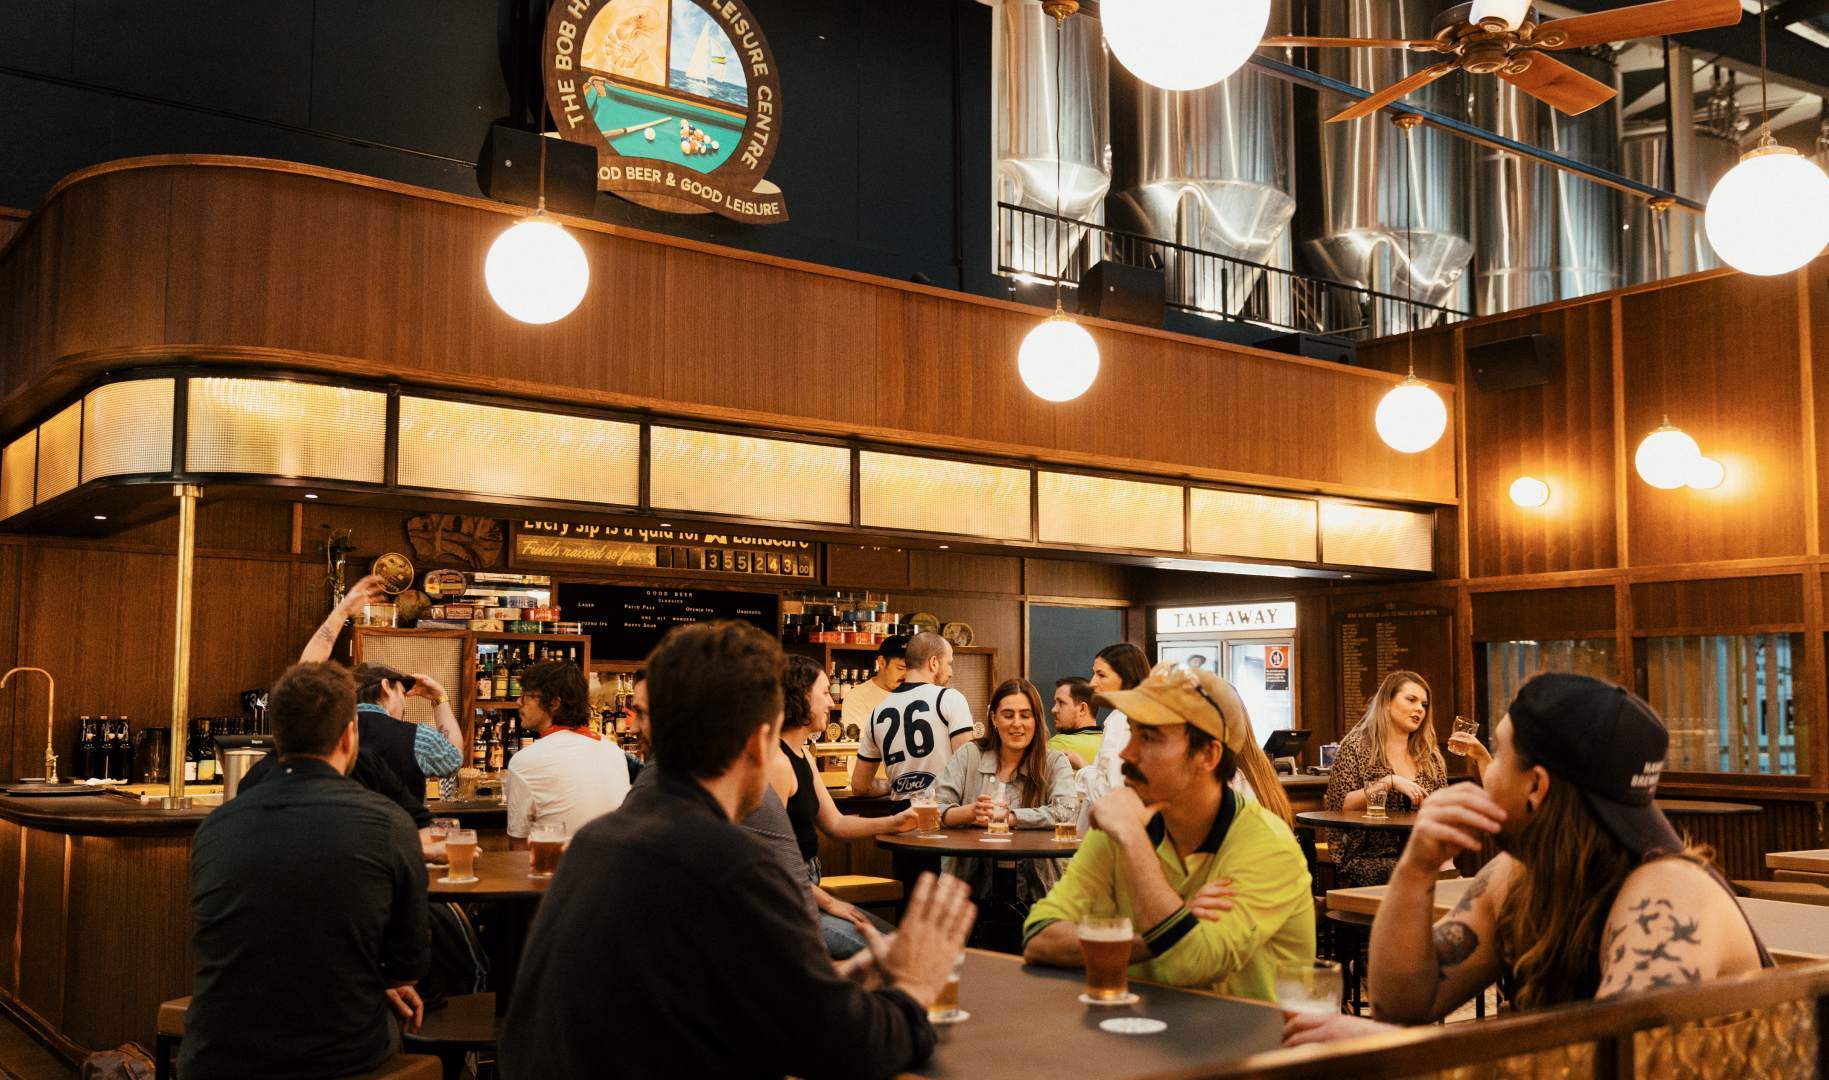 The Best Brewery Bars in Sydney